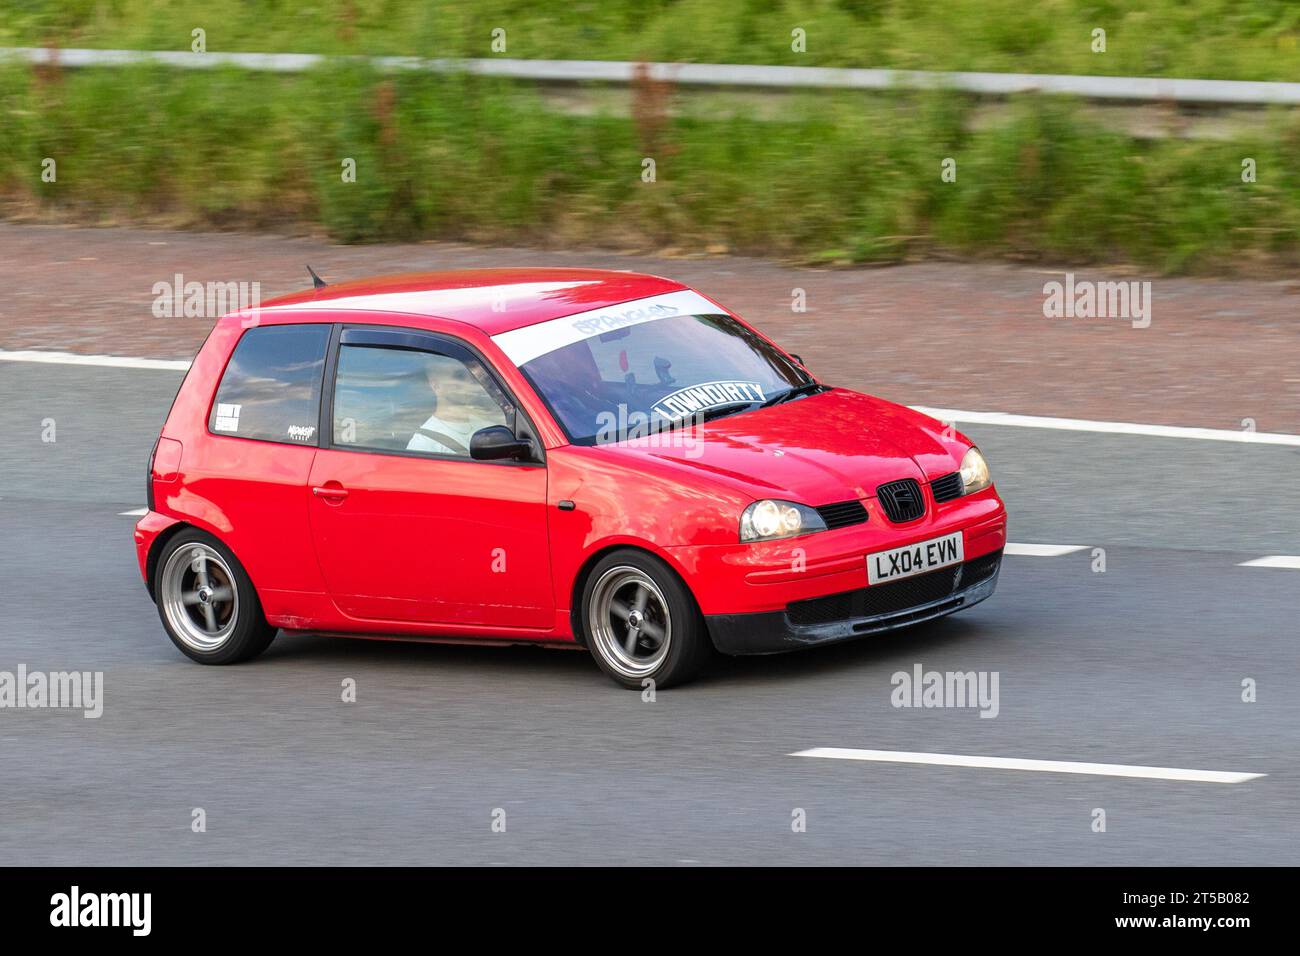 2004 Red Seat Arosa S Mpi Car Hatchback Petrol 998 cc. SEAT Arosa (Typ 6H) also called Volkswagen Lupo, a city car manufactured by the Spanish automaker SEAT from 1997 to 2004; Stock Photo